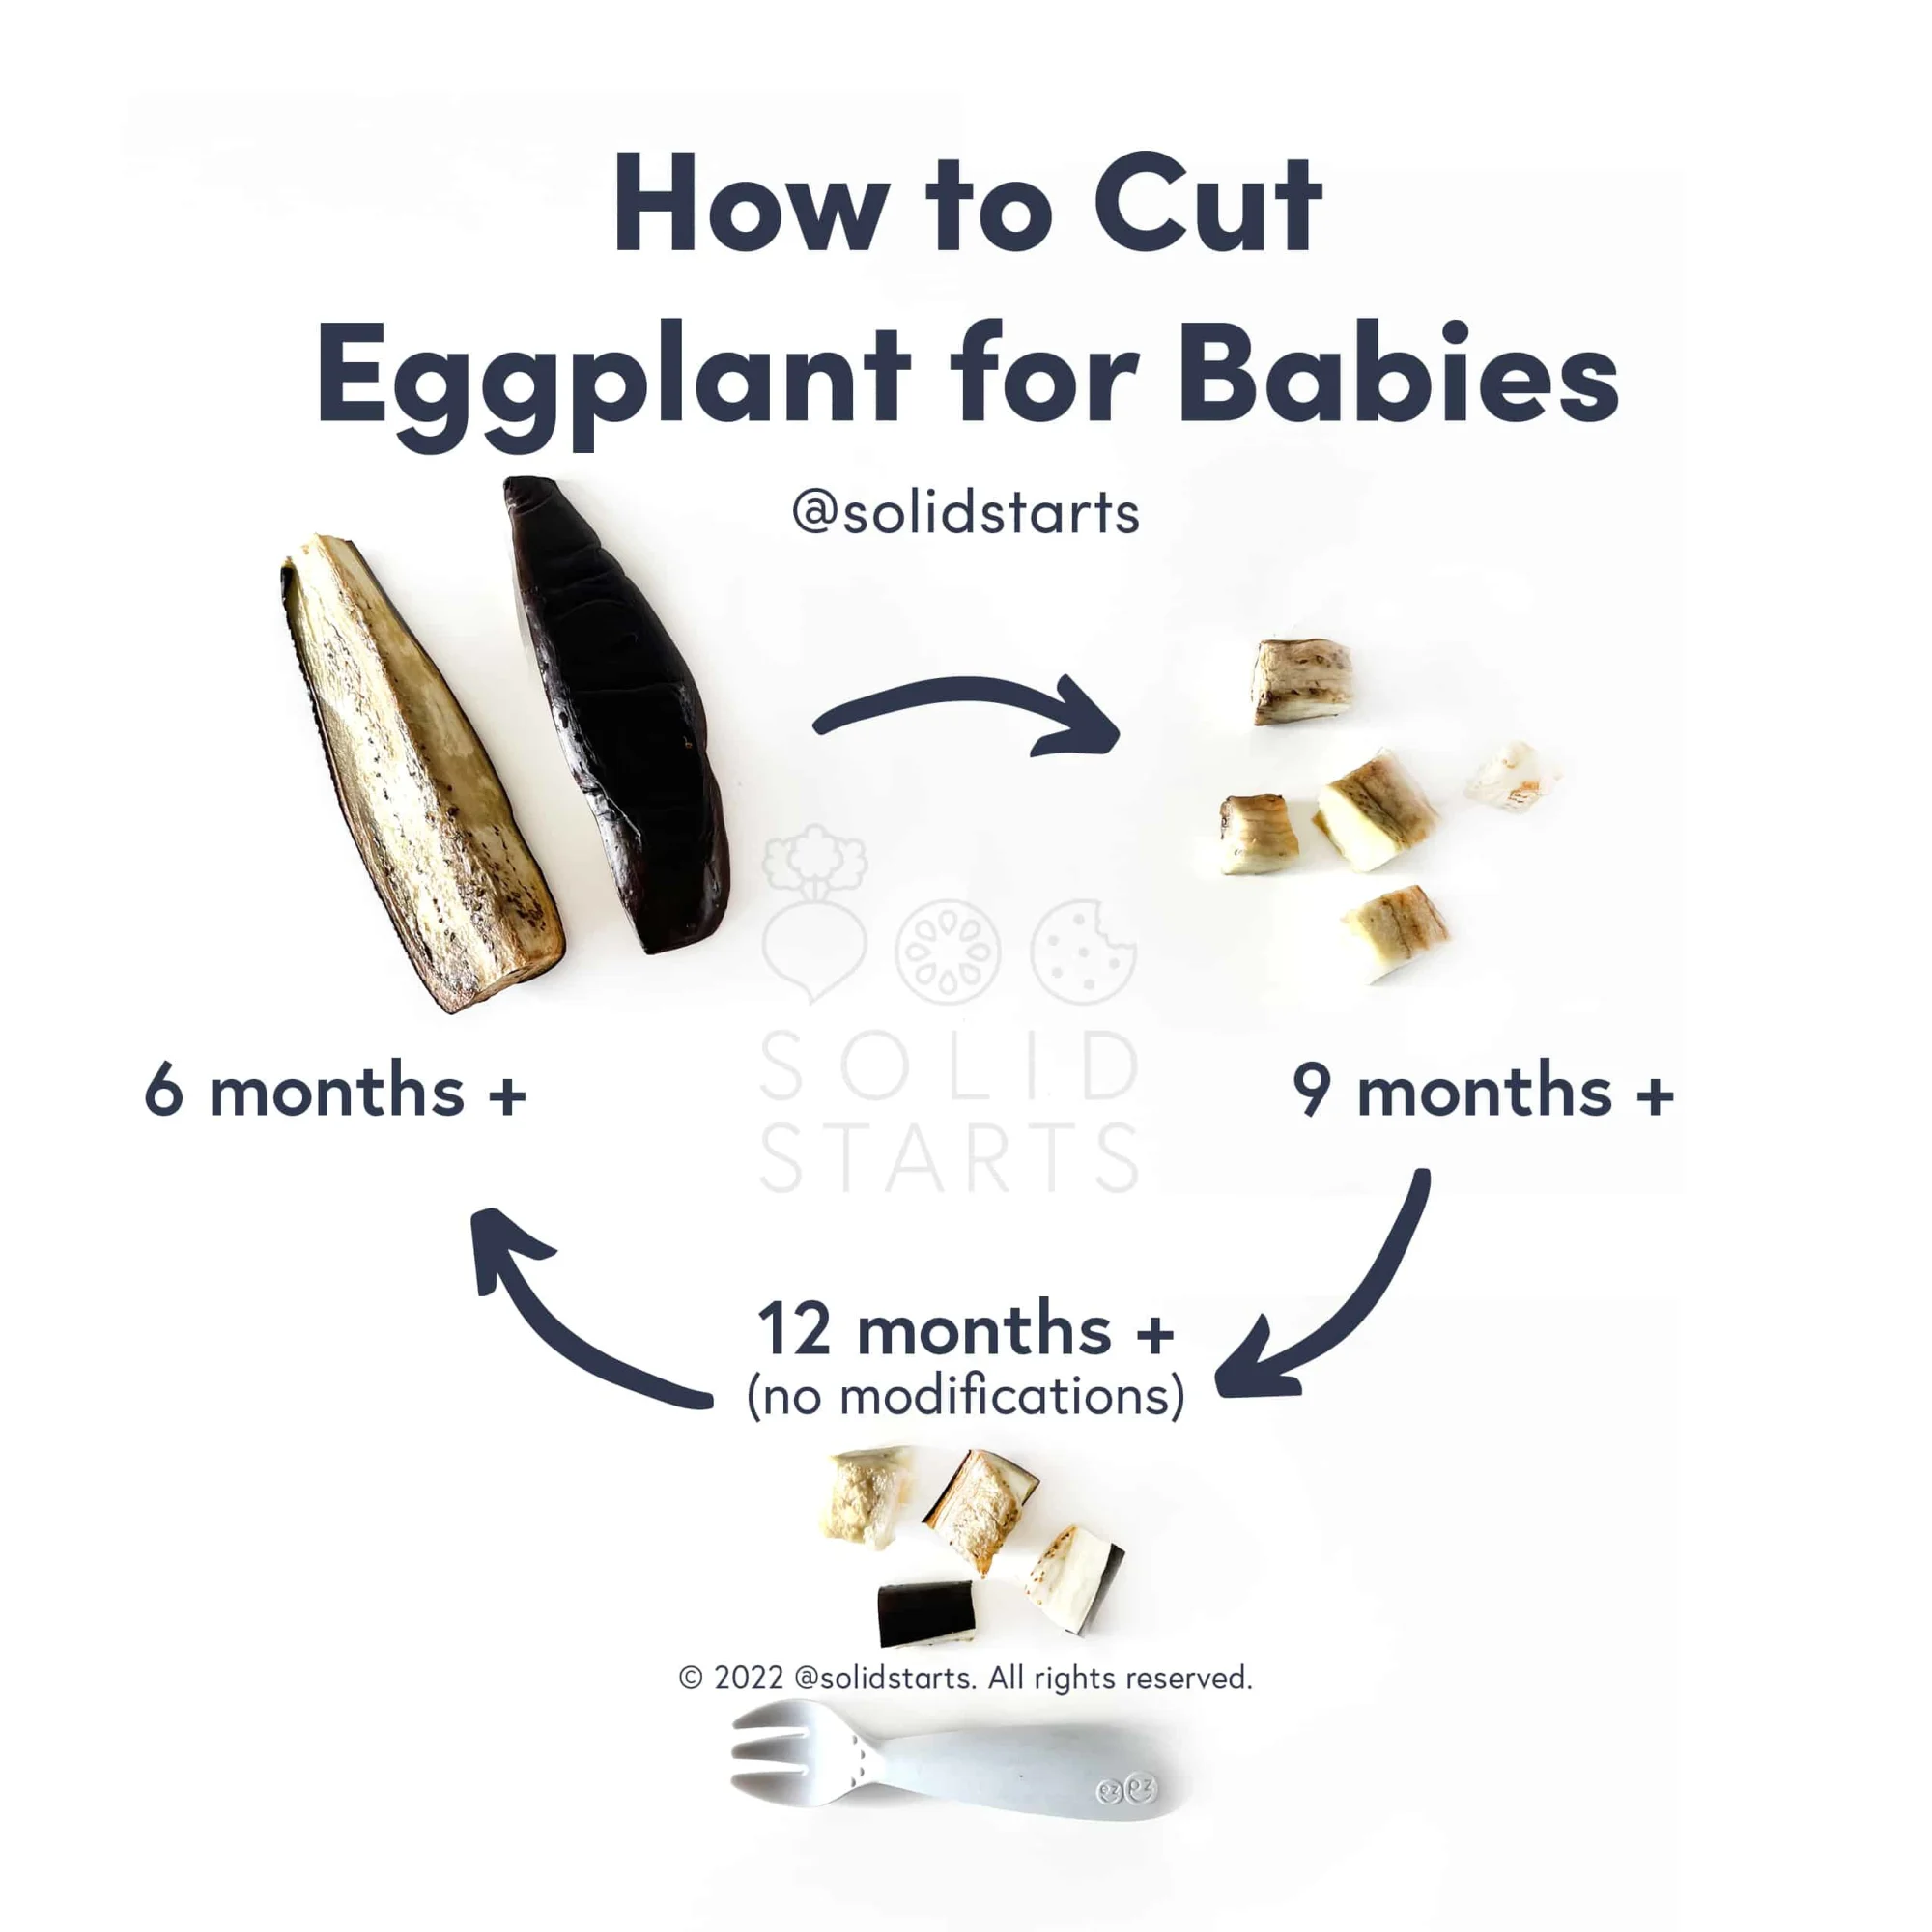 an infographic with the header "how to cut eggplant for babies": long cooked spears with skin on for babies 6 months+, bite sized cooked pieces for 9 months+, and bite sized pieces with a fork for 12 months+